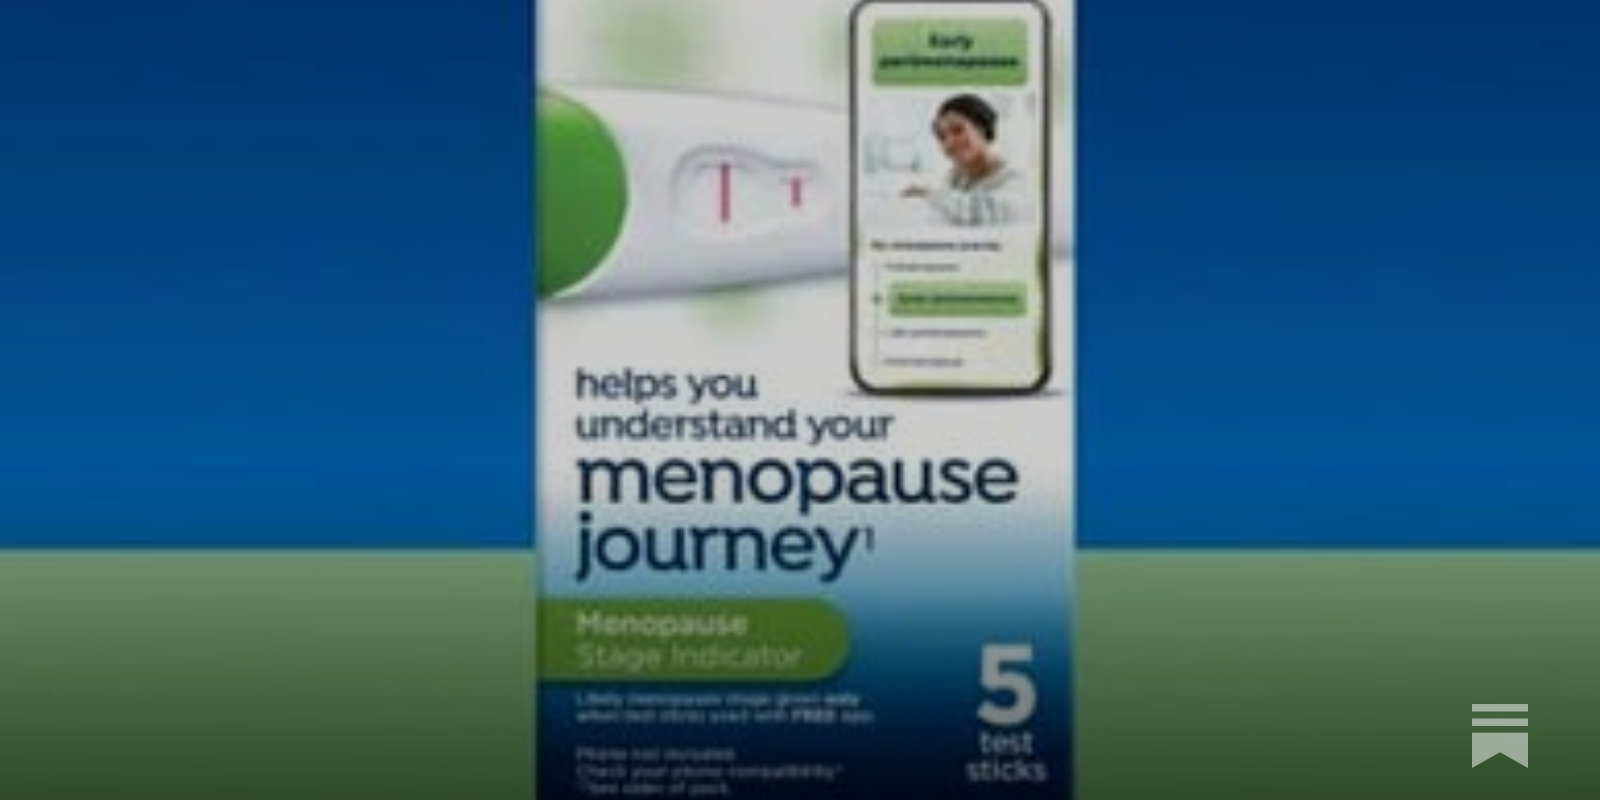 Menopause is the end of menstruation. Vaginal bleeding after menopause  isn't normal and should be evaluated by your doctor. Its causes c